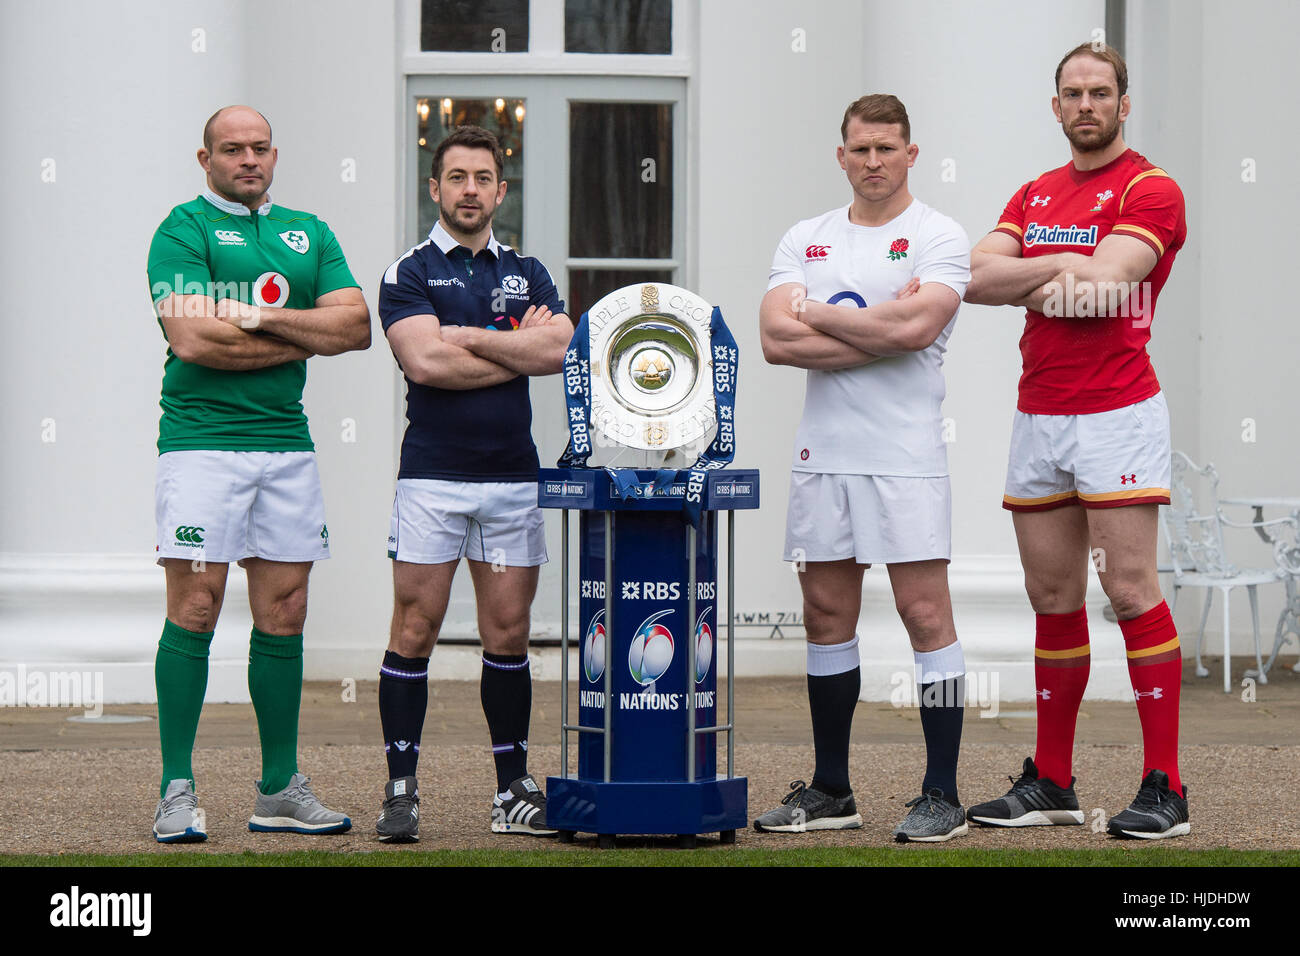 London, UK. 25th January 2017. Rory Best, Greig Laidlaw, Dylan Hartley and Alun Wynn Jones attends the launch of the RBS 6 Nations Championship at the Hurlingham Club London Credit: Alan D West/Alamy Live News Stock Photo